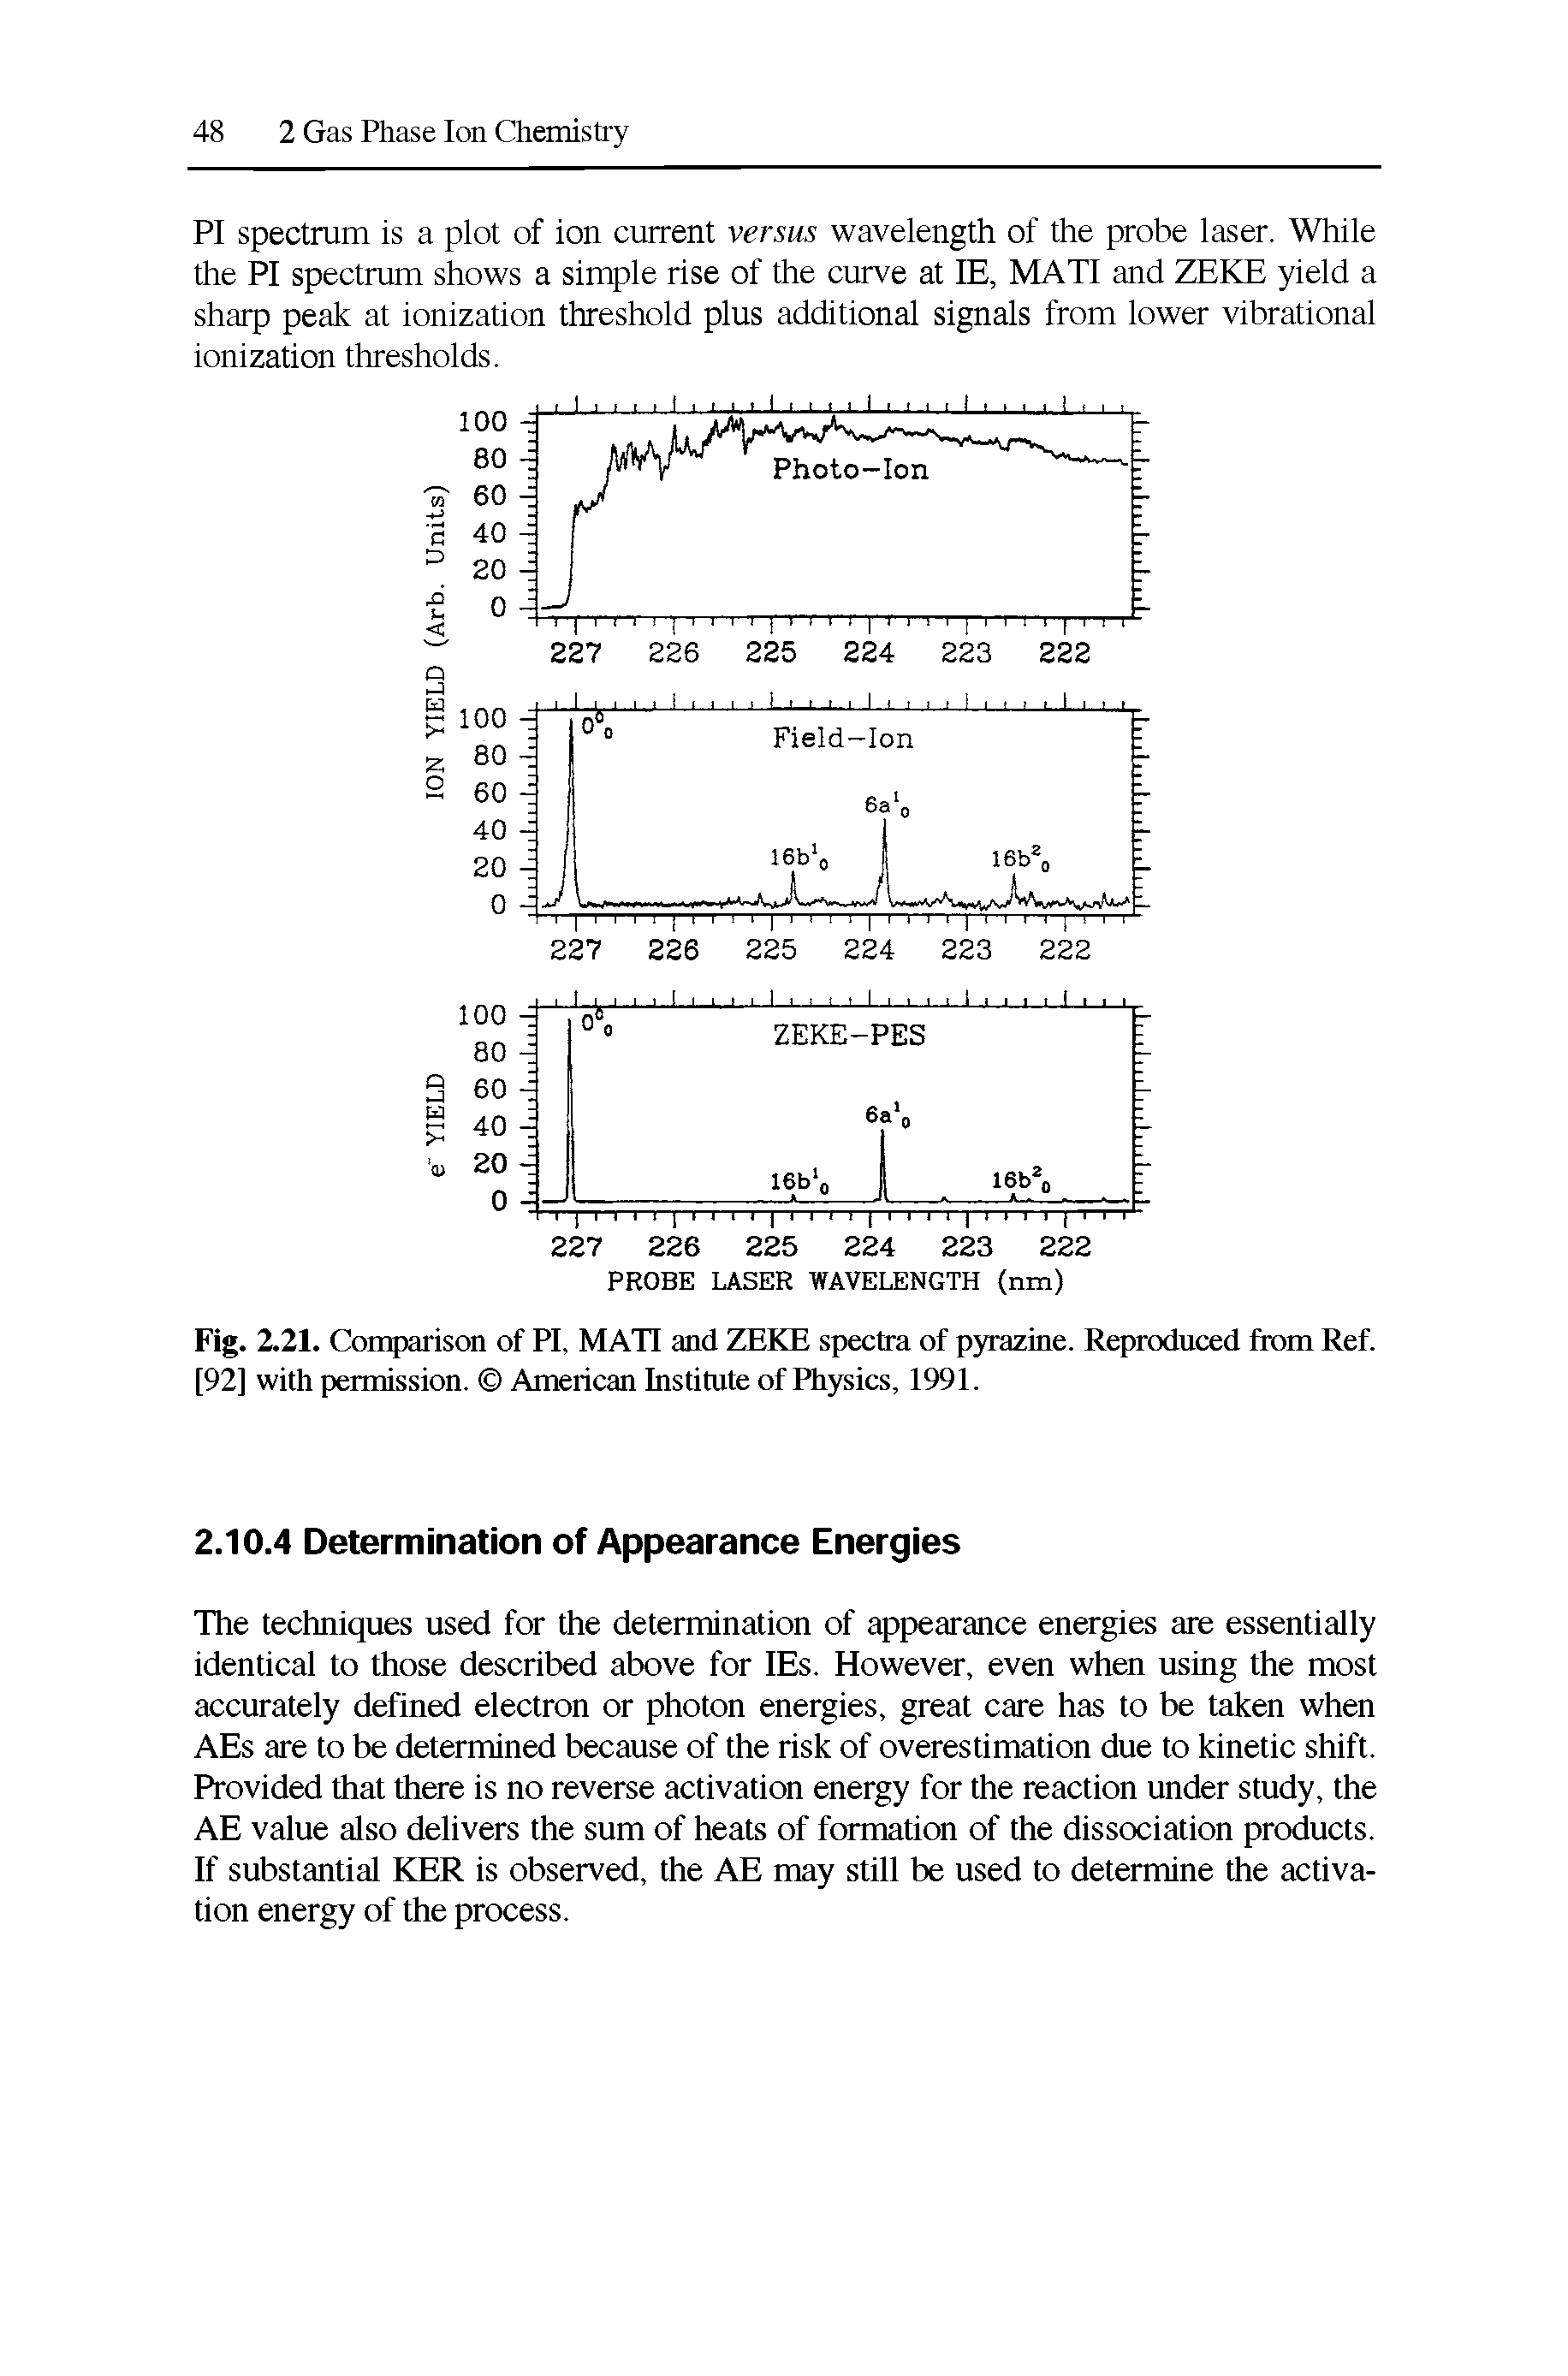 Fig. 2.21. Comparison of PI, MATI and ZEKE spectra of pyrazine. Reproduced from Ref. [92] with permission. American Institute of Physics, 1991.